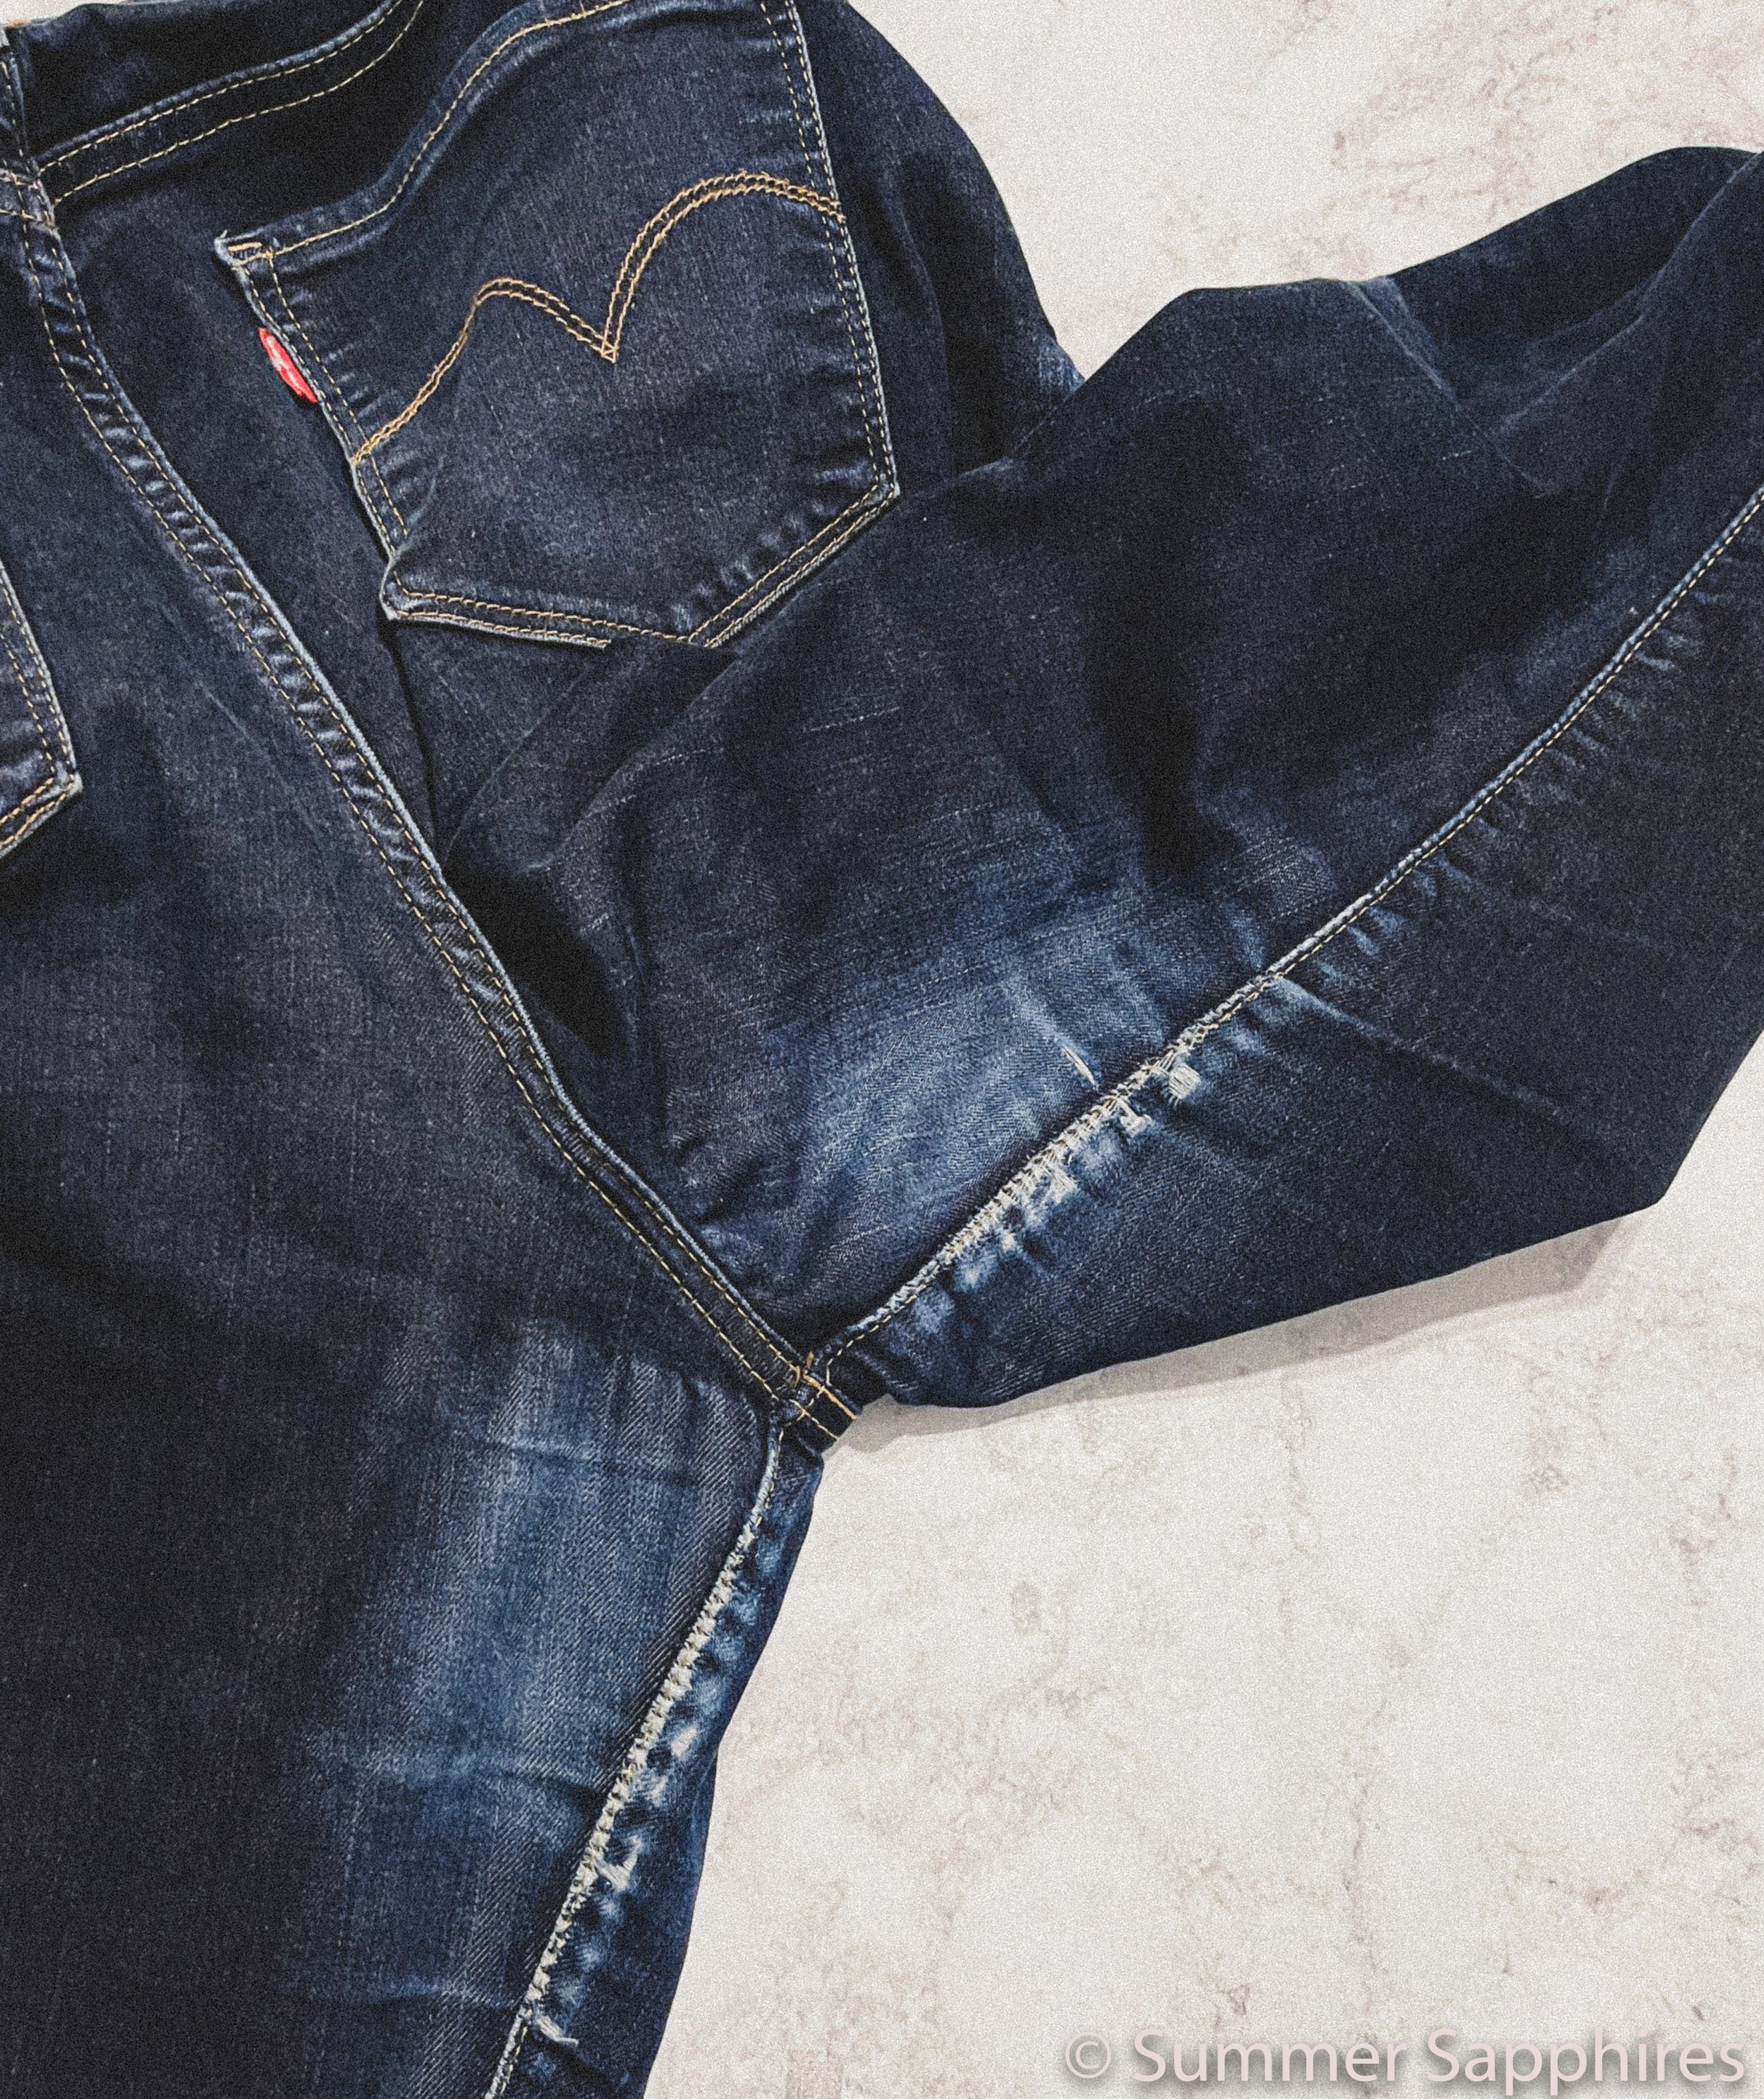 How to Repair Threadbare Jeans in Just a Few Simple Steps